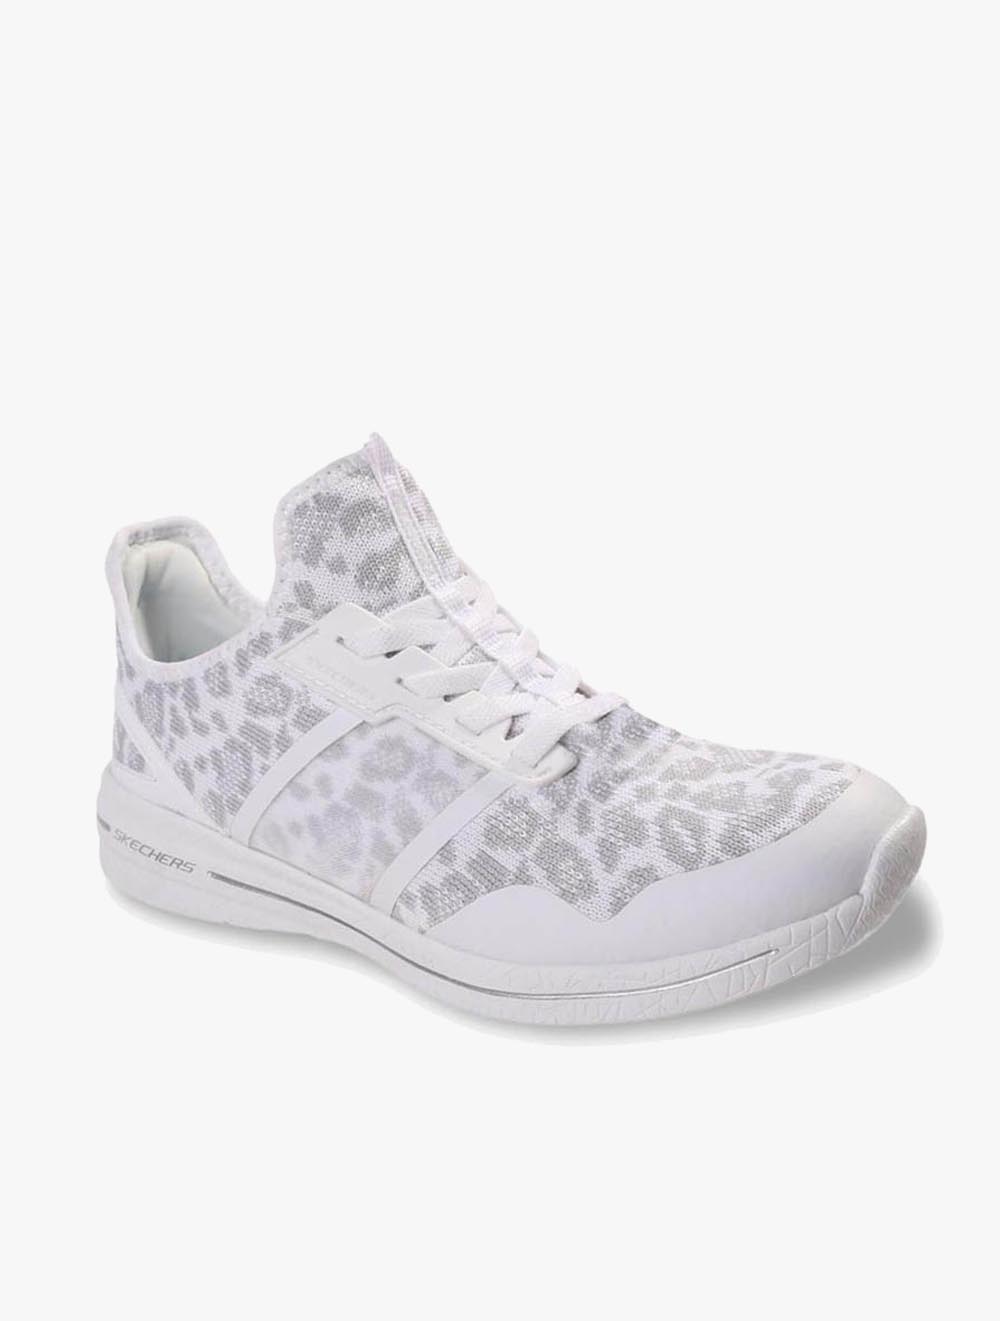 Skechers Burst 2.0 - Game Changing Women's Sneakers Shoes